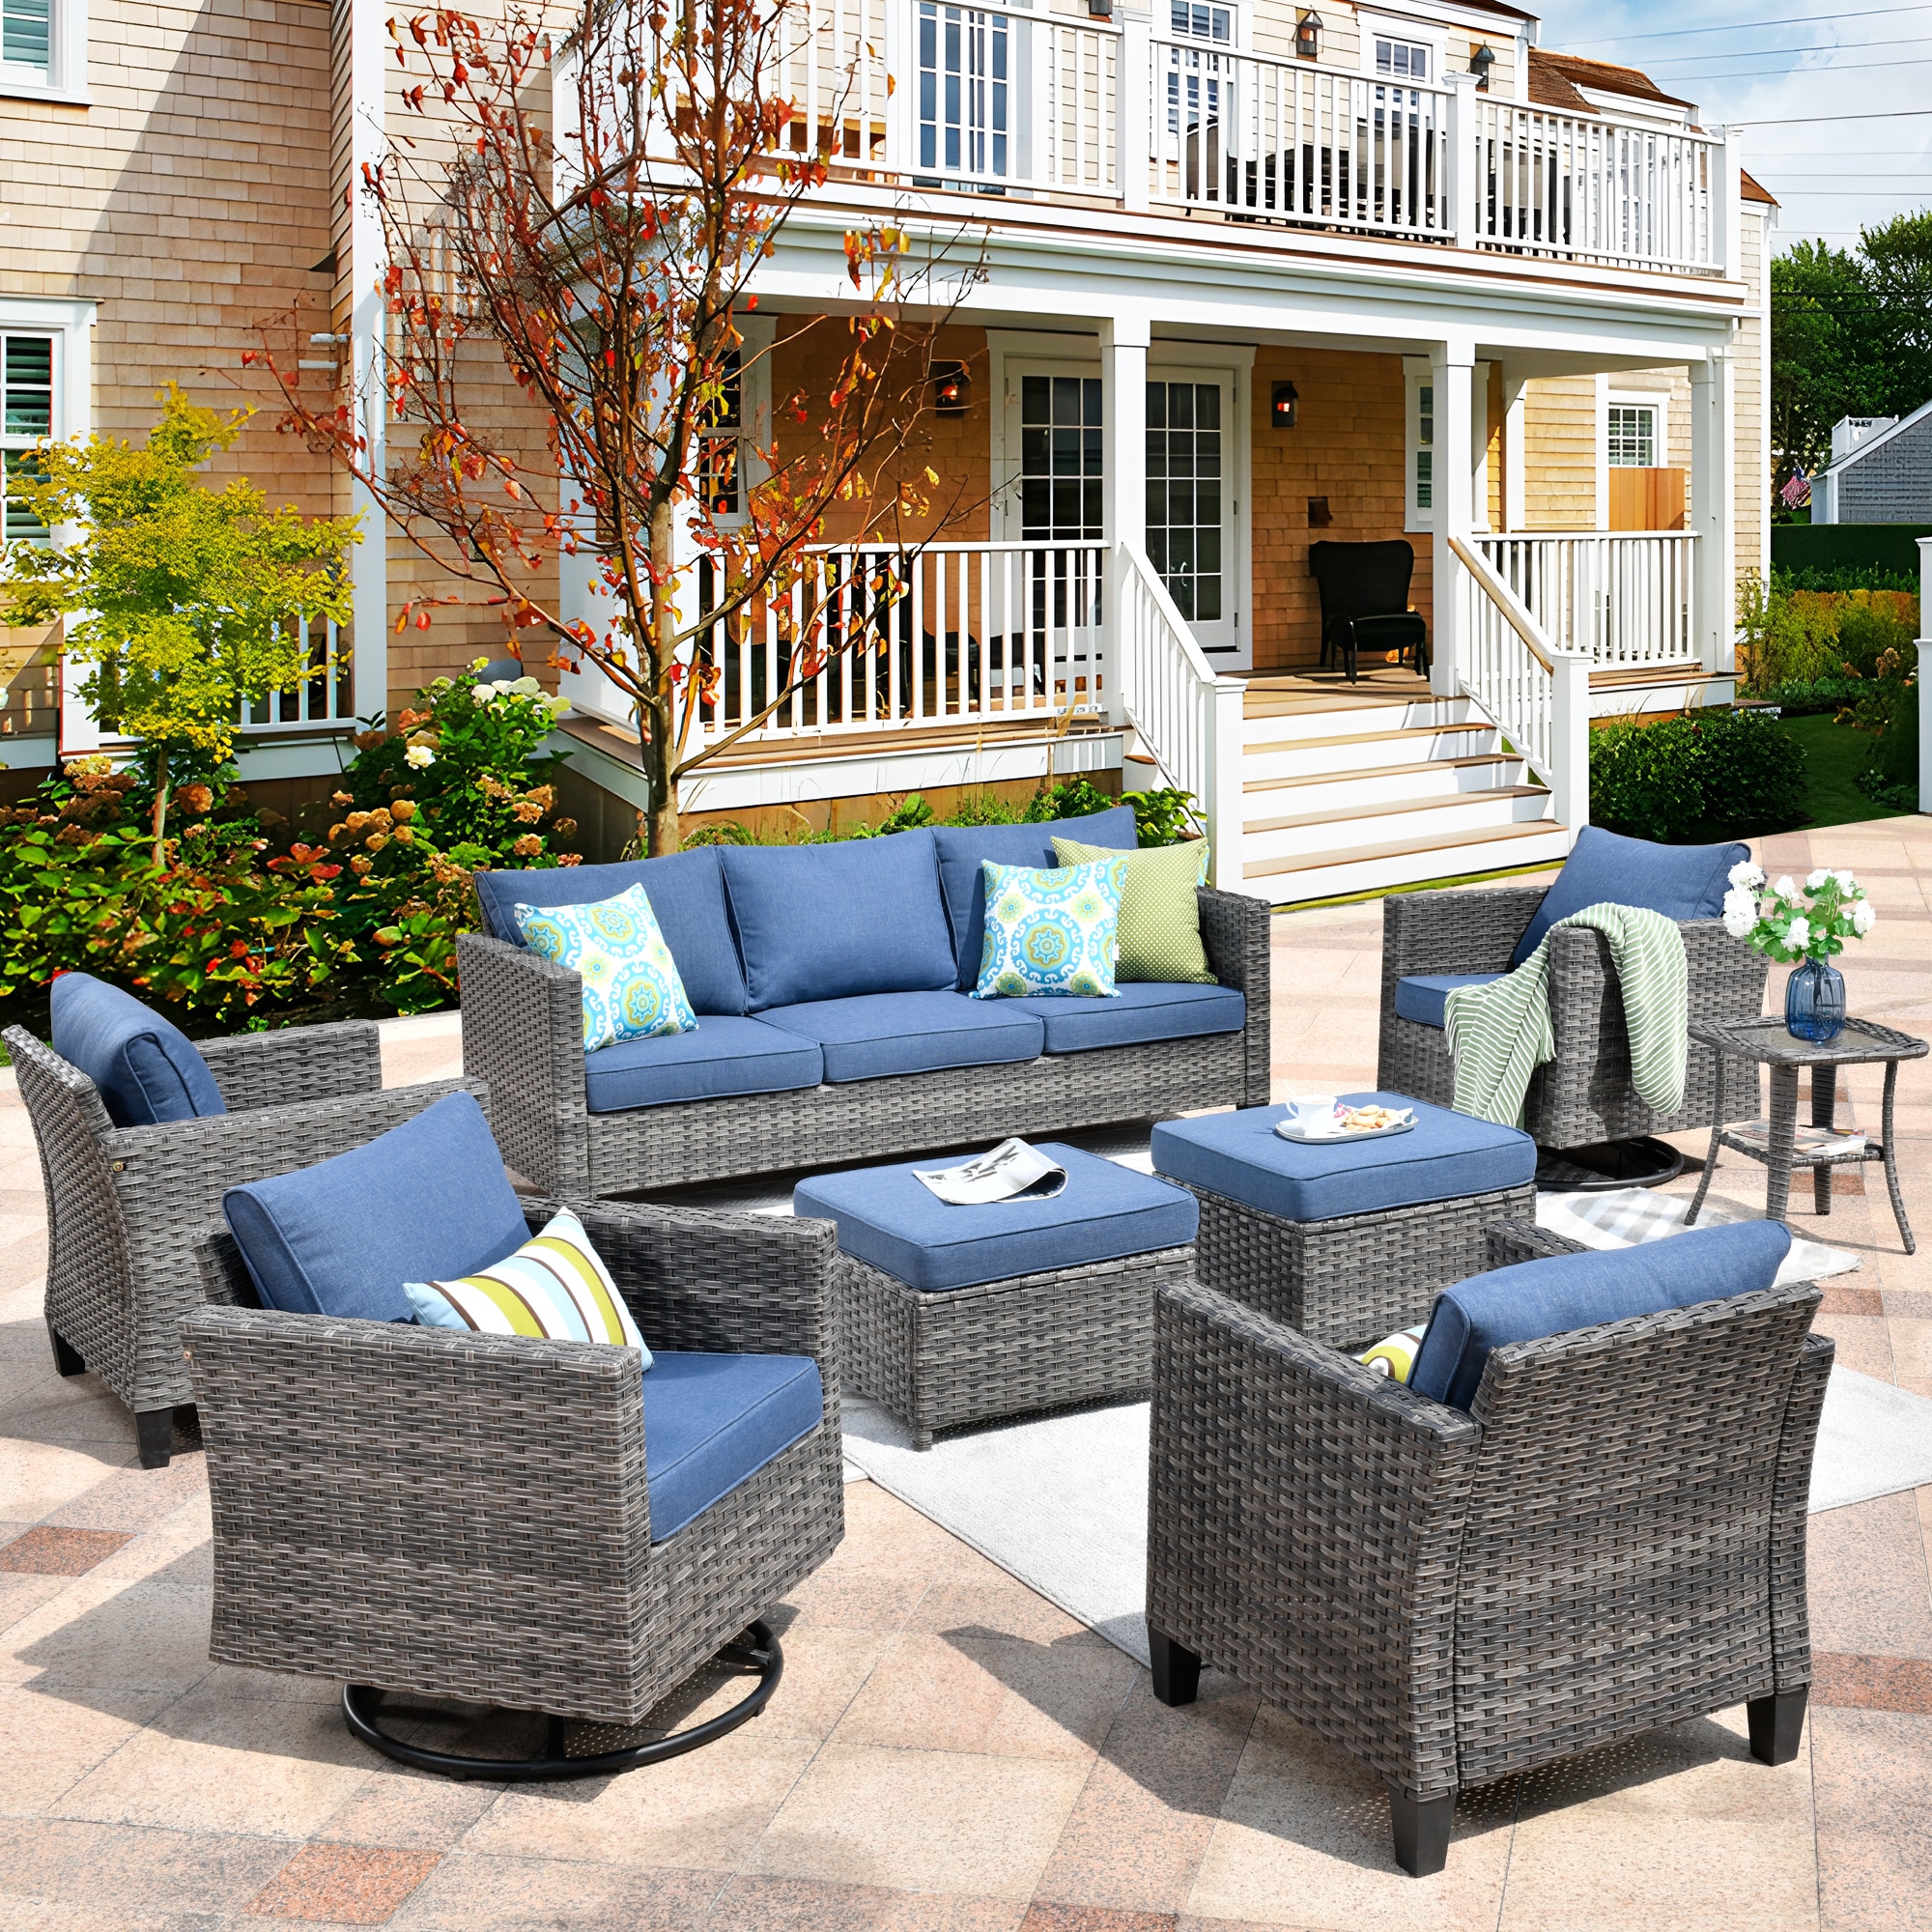 XIZZI Lullaby 8-Piece Rattan Patio Conversation Set with Blue Cushions